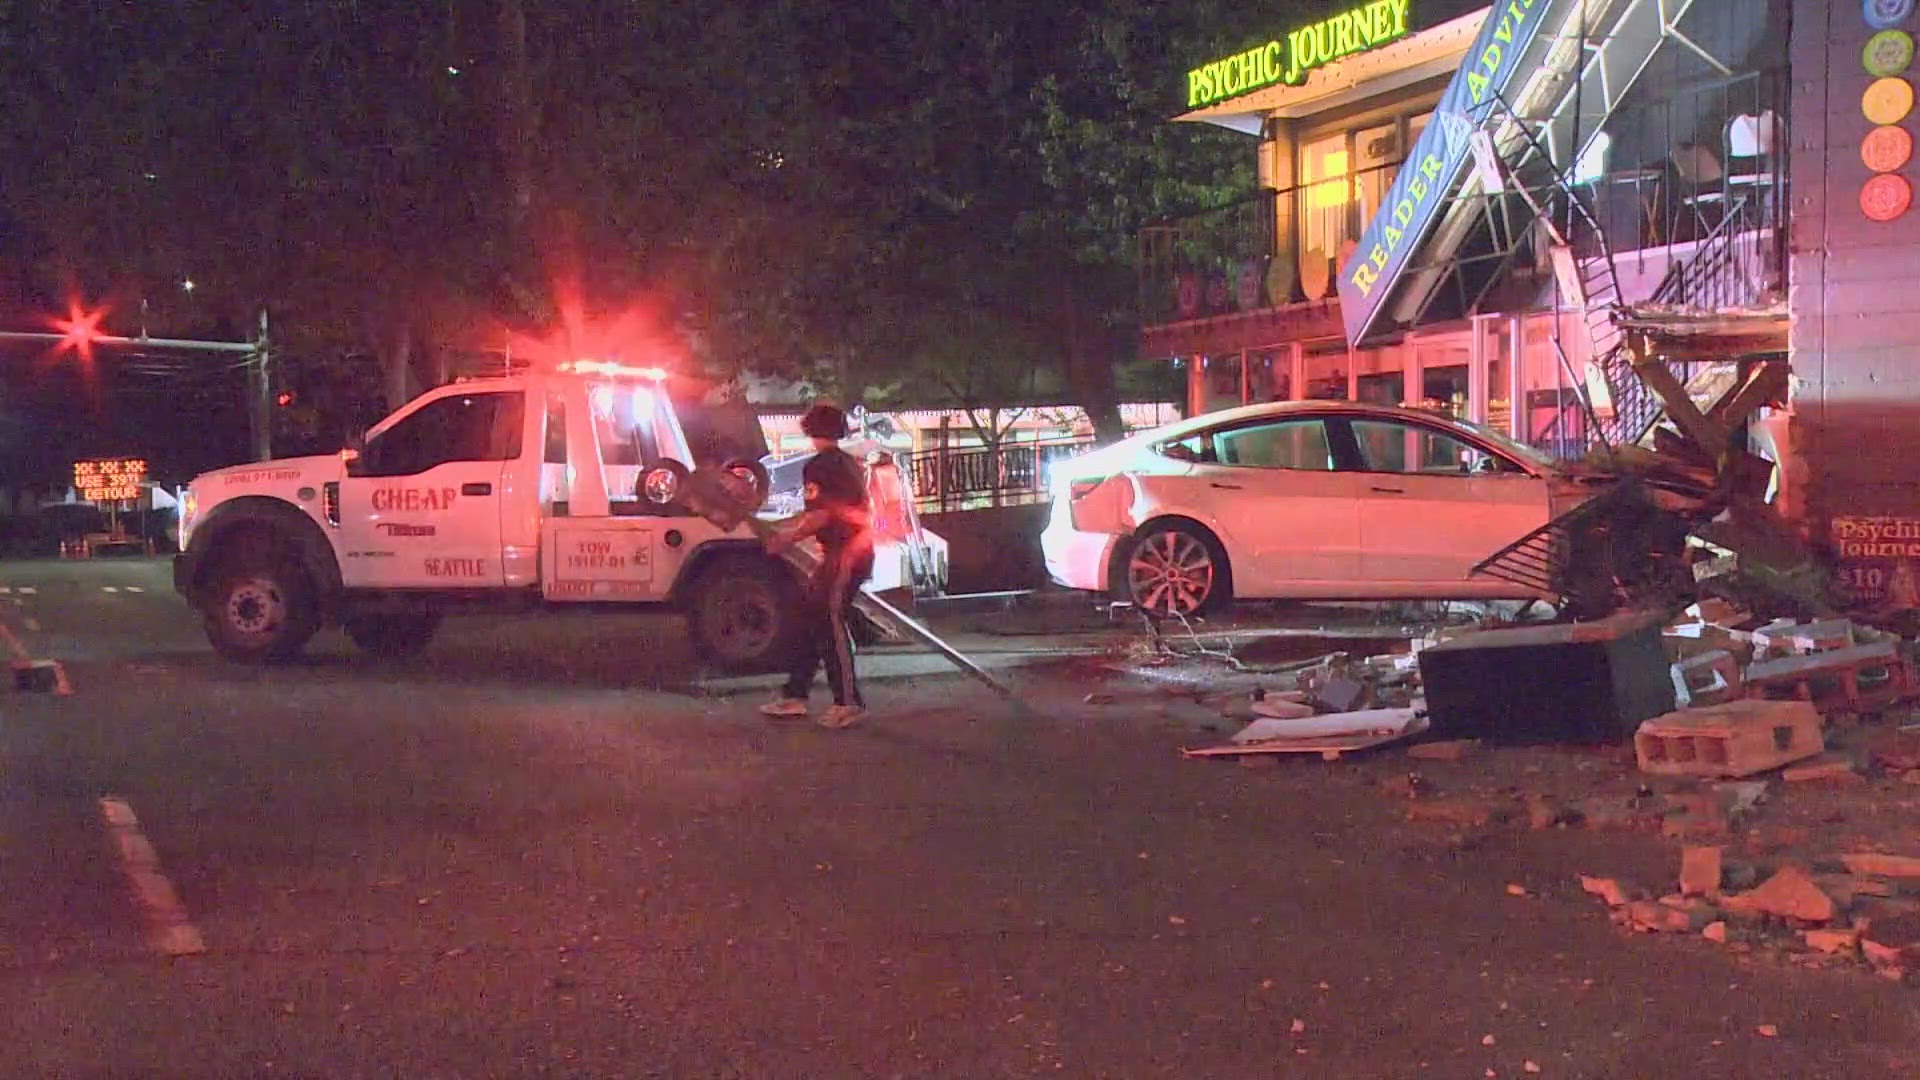 Multiple businesses near the Lenin statue in Seattle were significantly damaged.